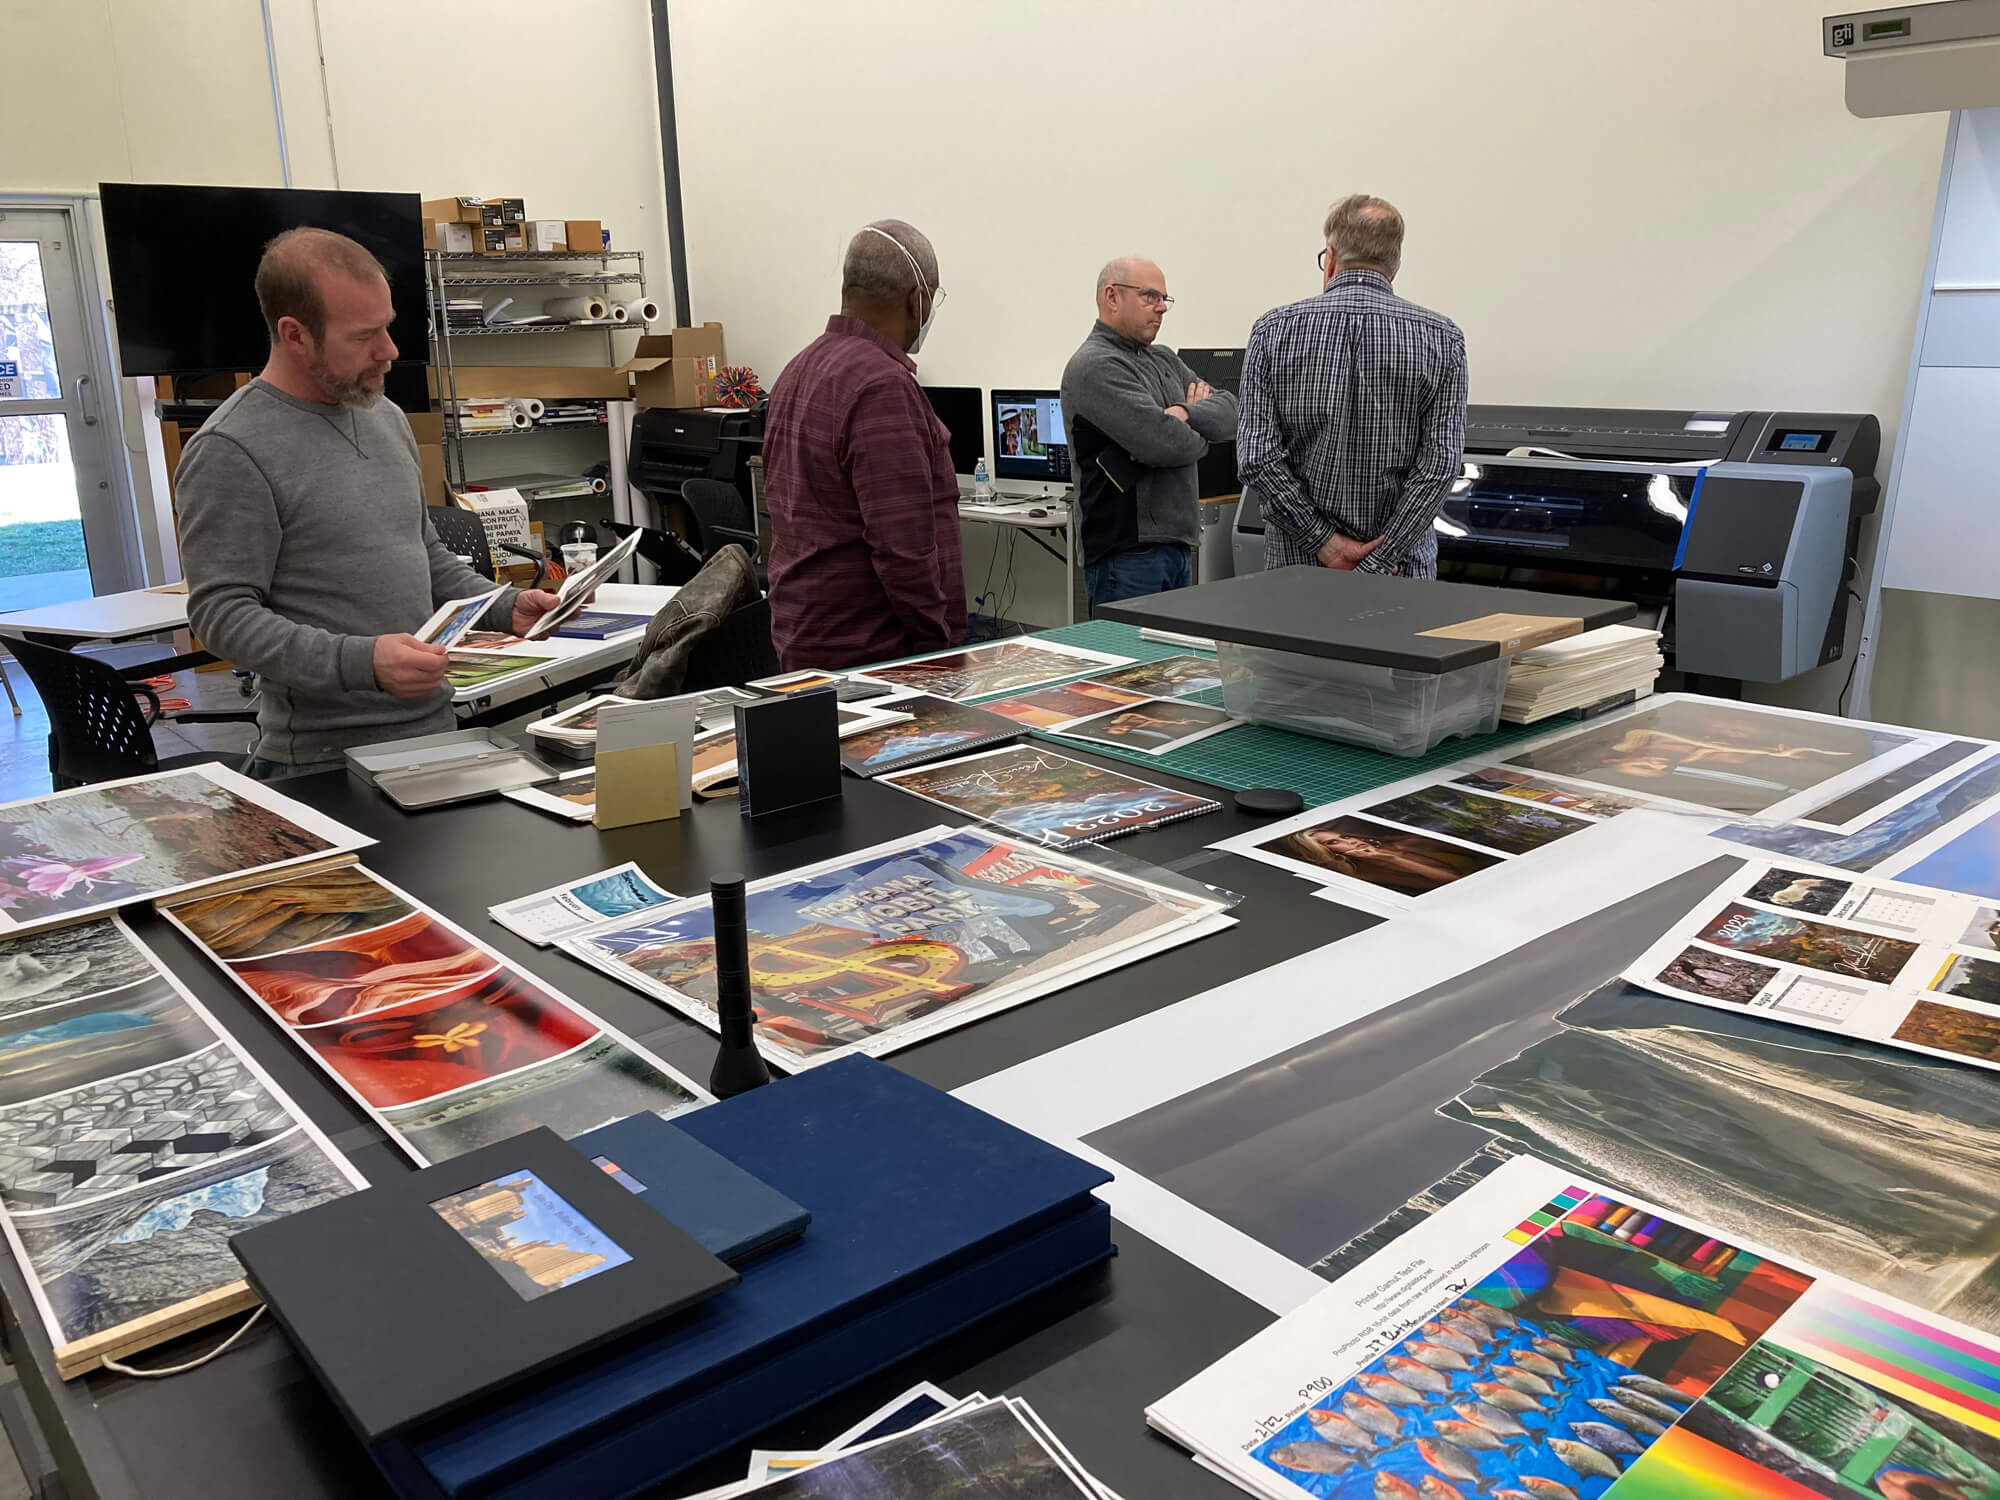 We have large inspection tables. Here we have a variety of print output that we can examine. Different paper surfaces, different ways to print projects